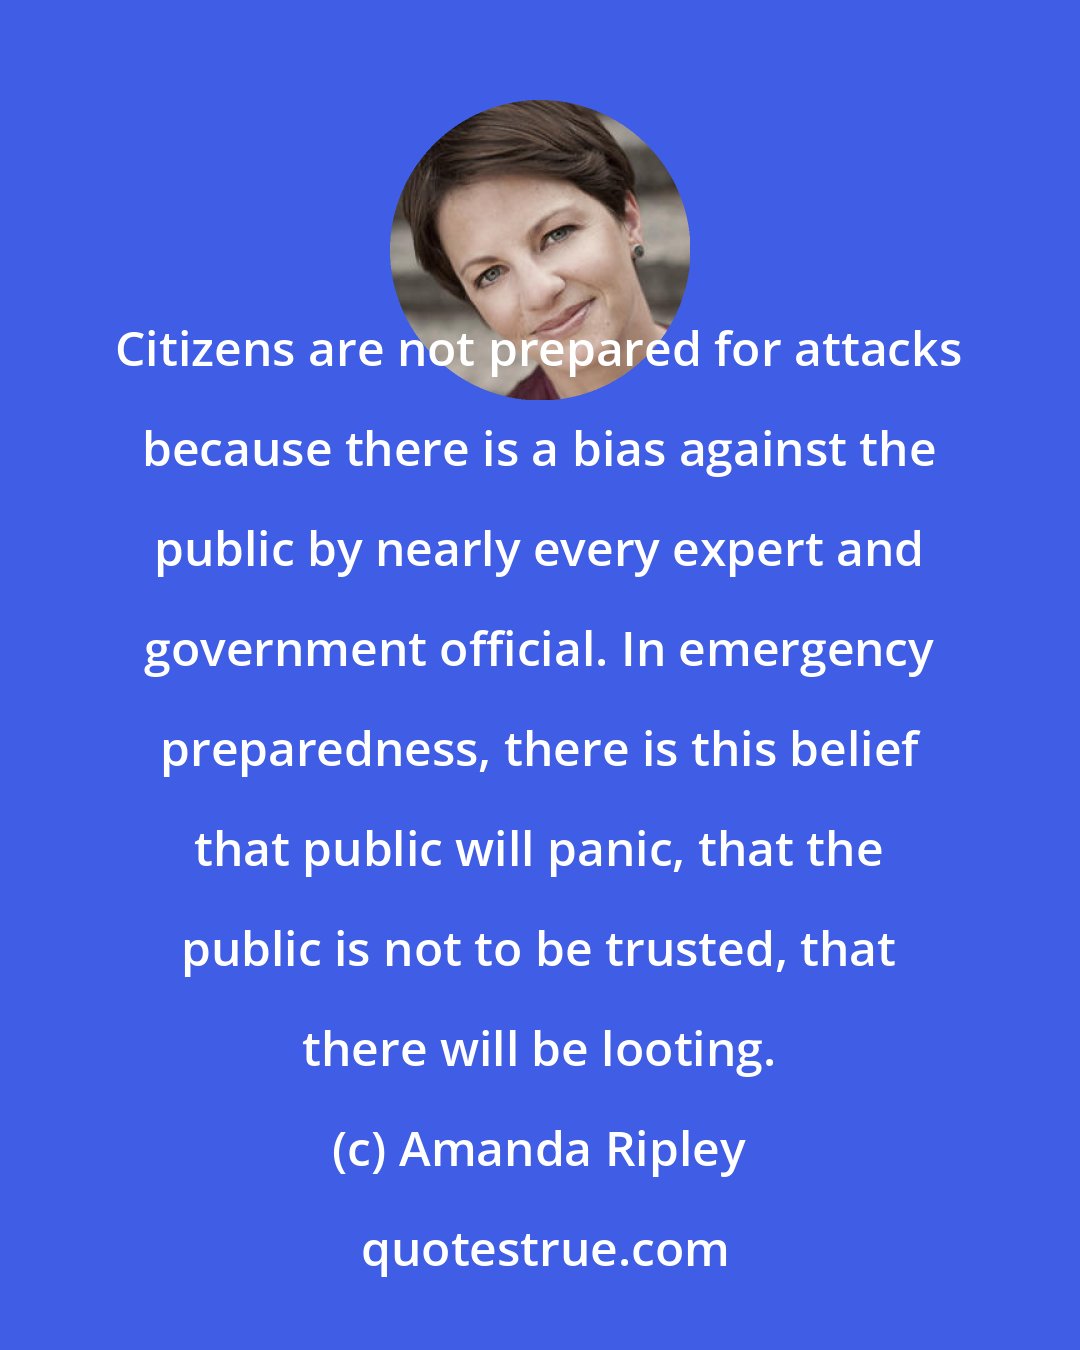 Amanda Ripley: Citizens are not prepared for attacks because there is a bias against the public by nearly every expert and government official. In emergency preparedness, there is this belief that public will panic, that the public is not to be trusted, that there will be looting.